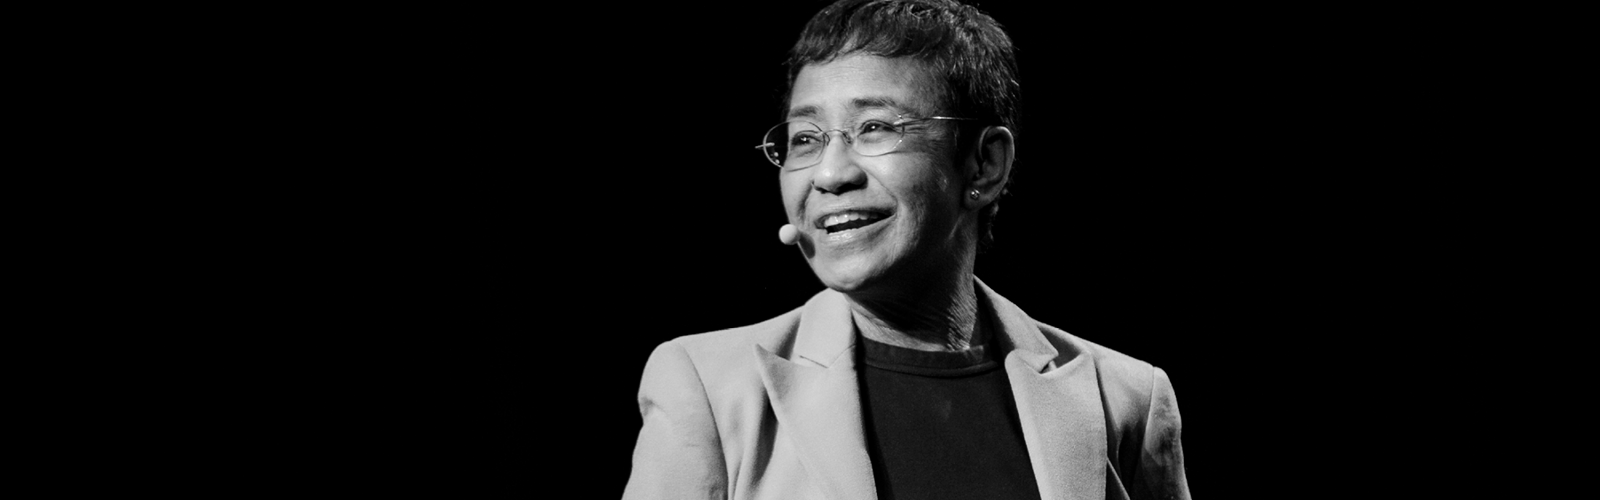 Maria Ressa smiling on a dark background wearing a headset microphone during a past speaking event.